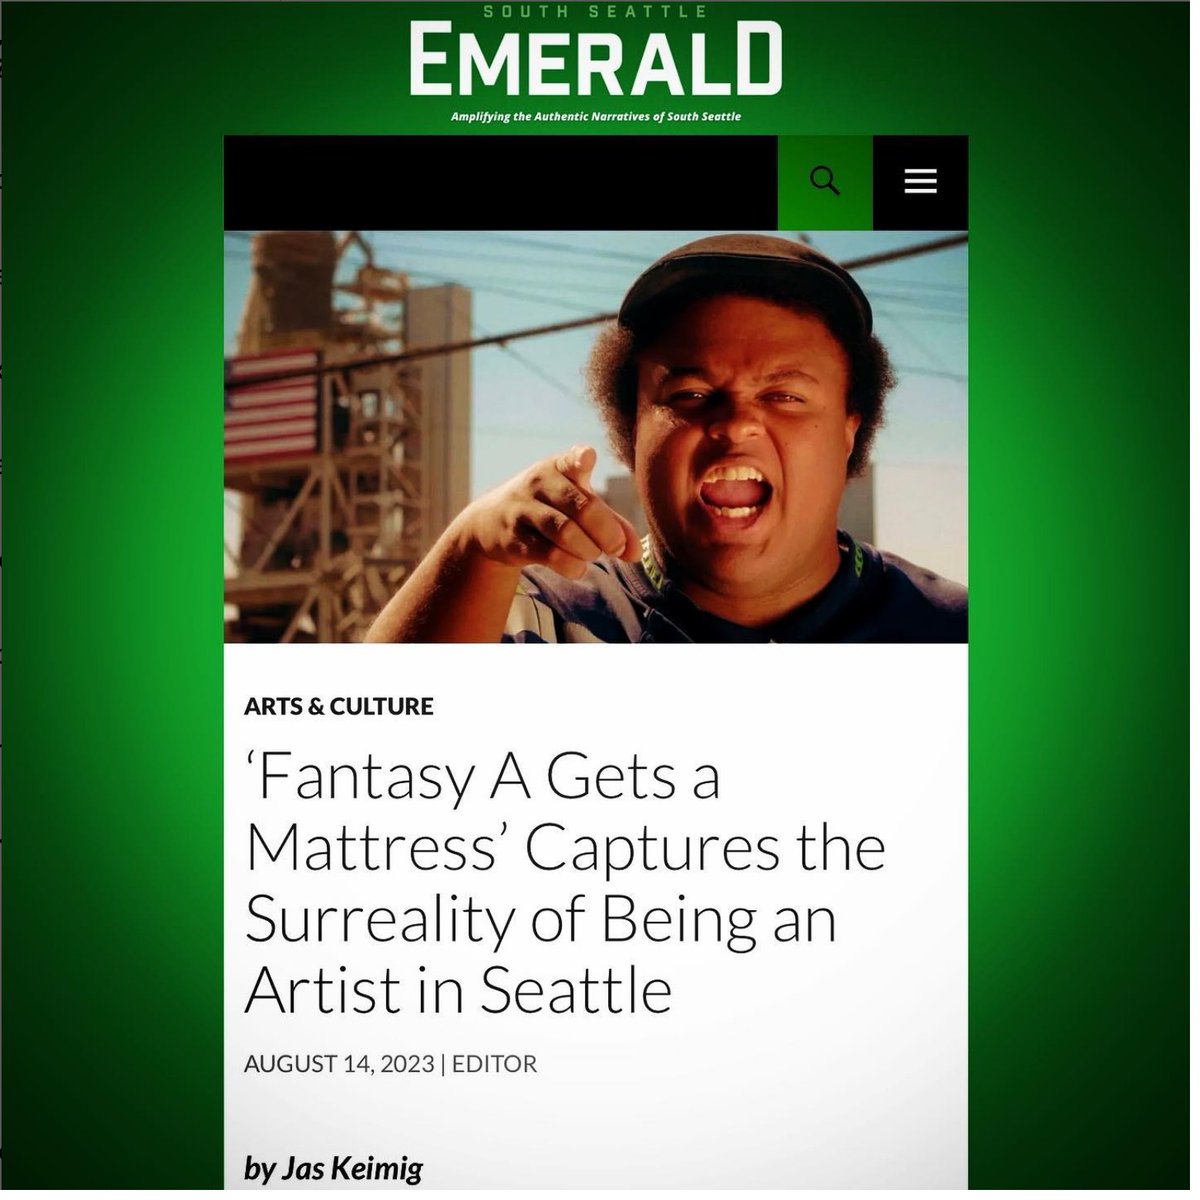 Incredibly excited to share the glowing review Fantasy A Gets a Mattress received from the @SoSeaEmerald's @jaskeimig!

It's happening, people!!! 

Read the full article:
southseattleemerald.com/2023/08/14/fan… #fantasyagetsamattress #fantasya #seattle #moviereview #southseattle